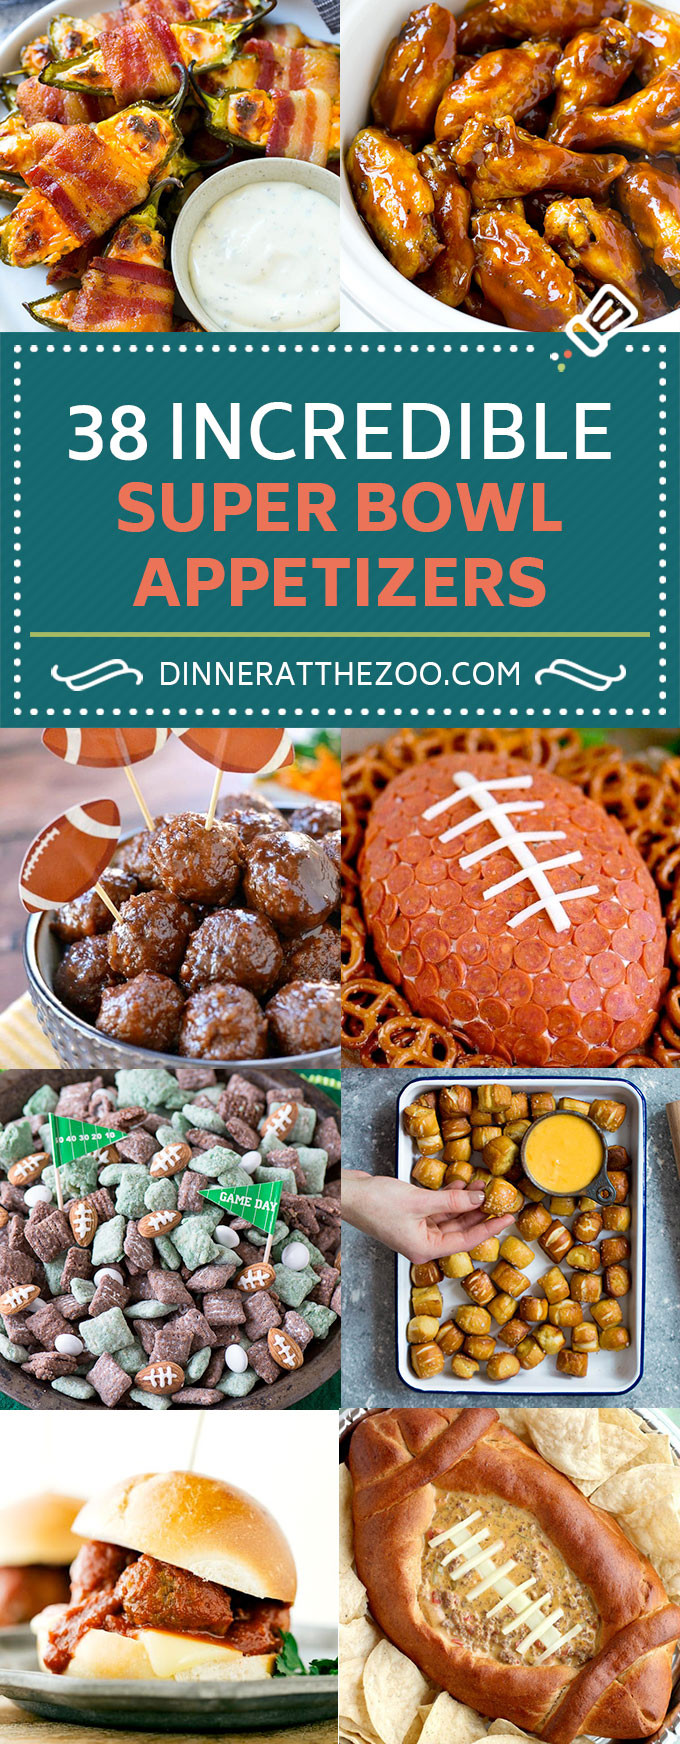 Super Bowl Dishes Recipes
 45 Incredible Super Bowl Appetizer Recipes Dinner at the Zoo